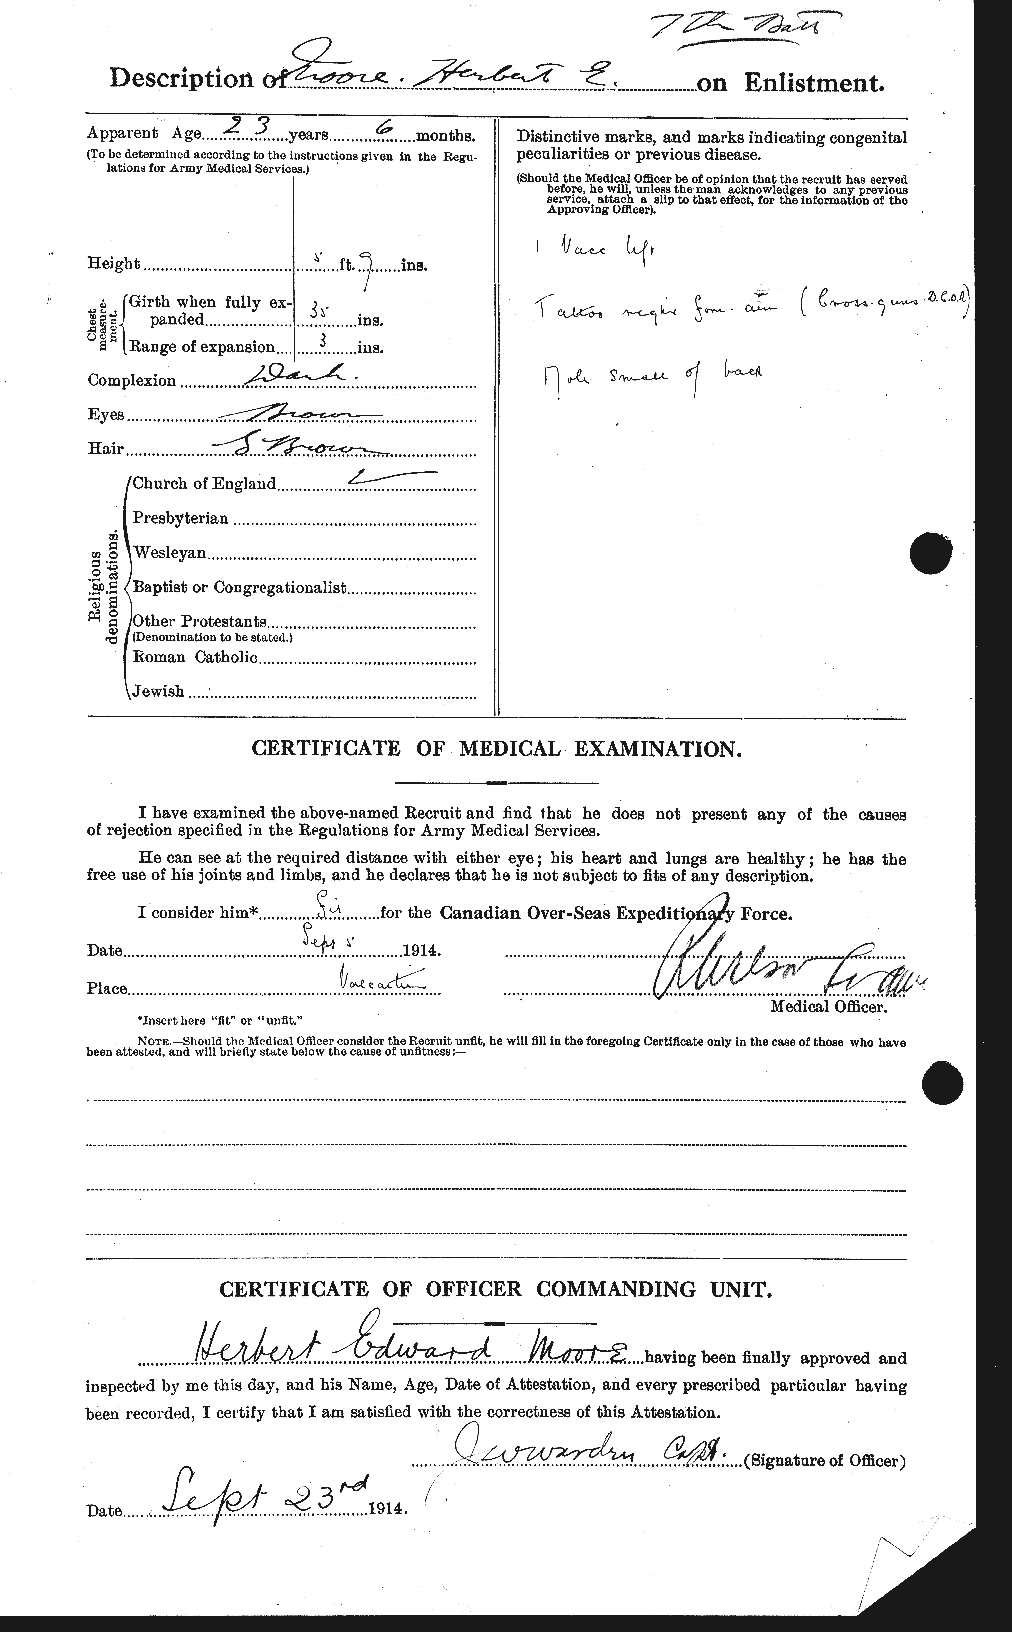 Personnel Records of the First World War - CEF 502116b